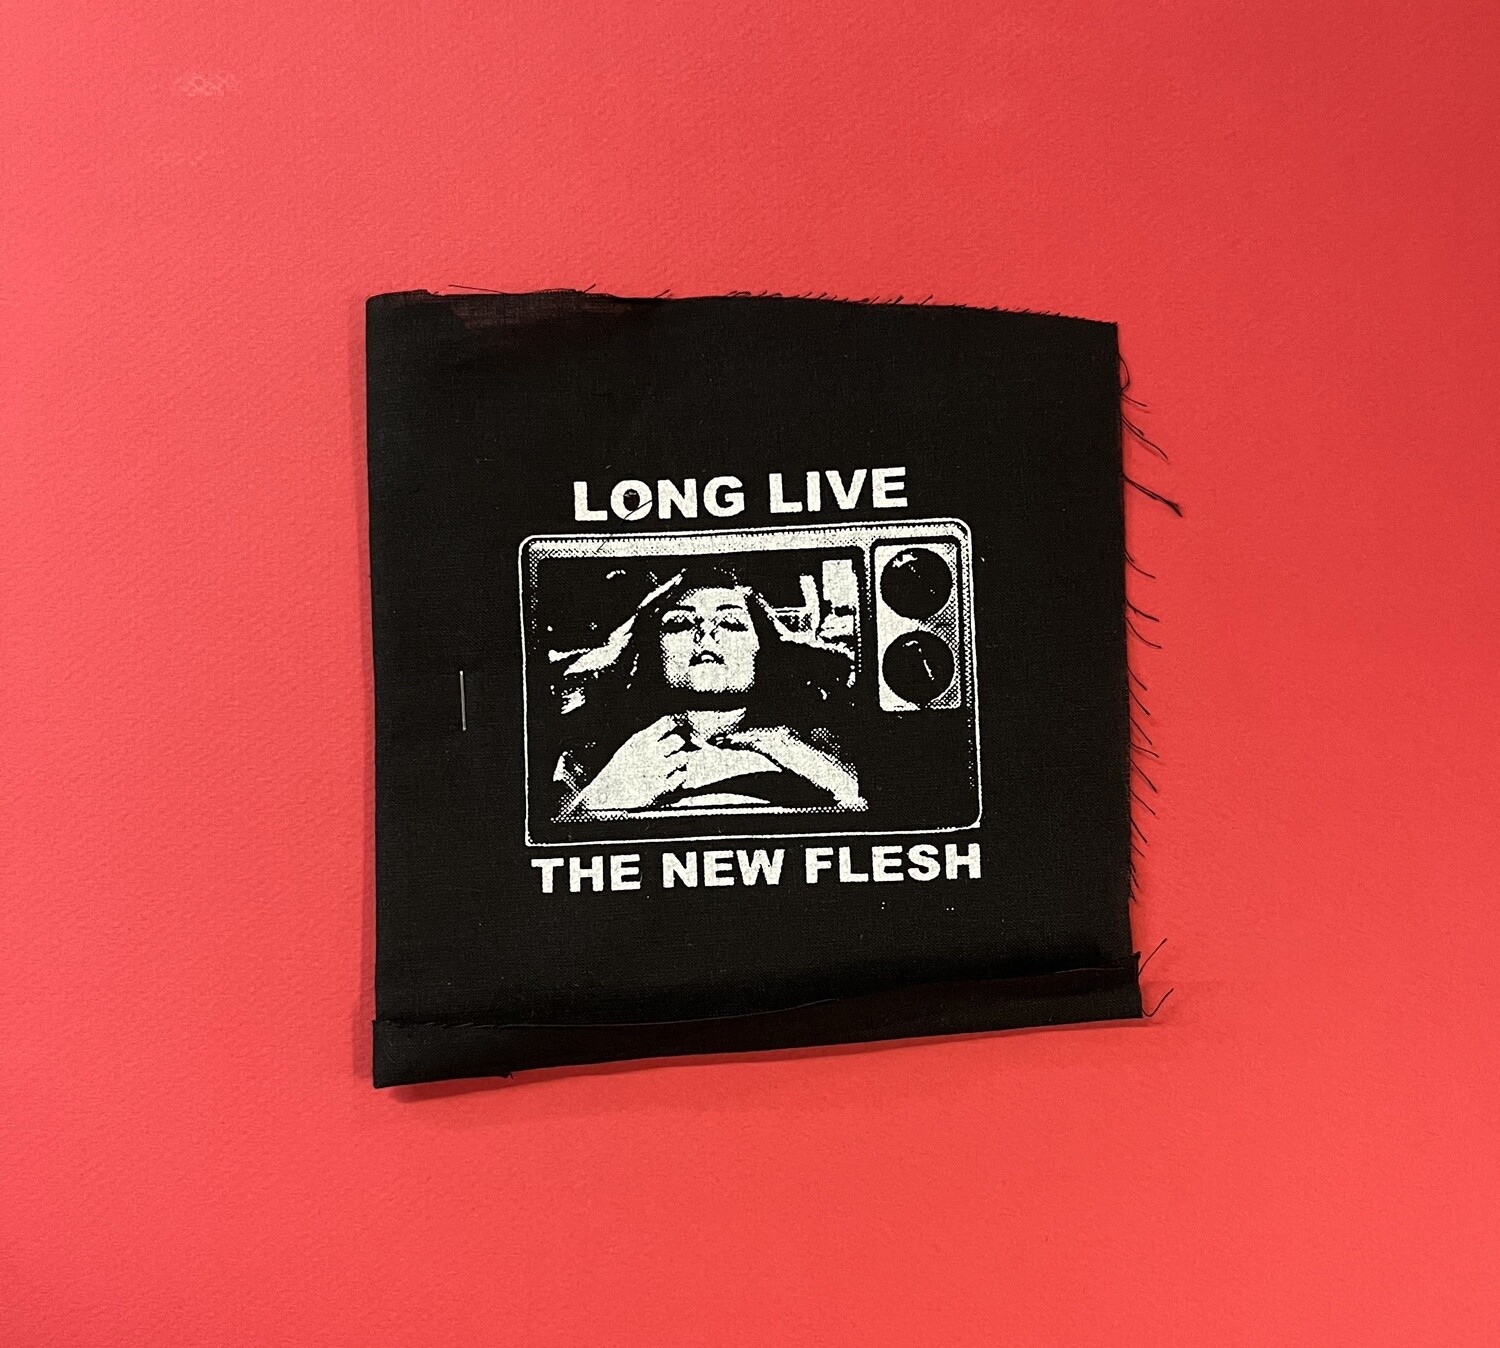 LONG LIVE THE NEW FLESH, patch by Retirement Fund